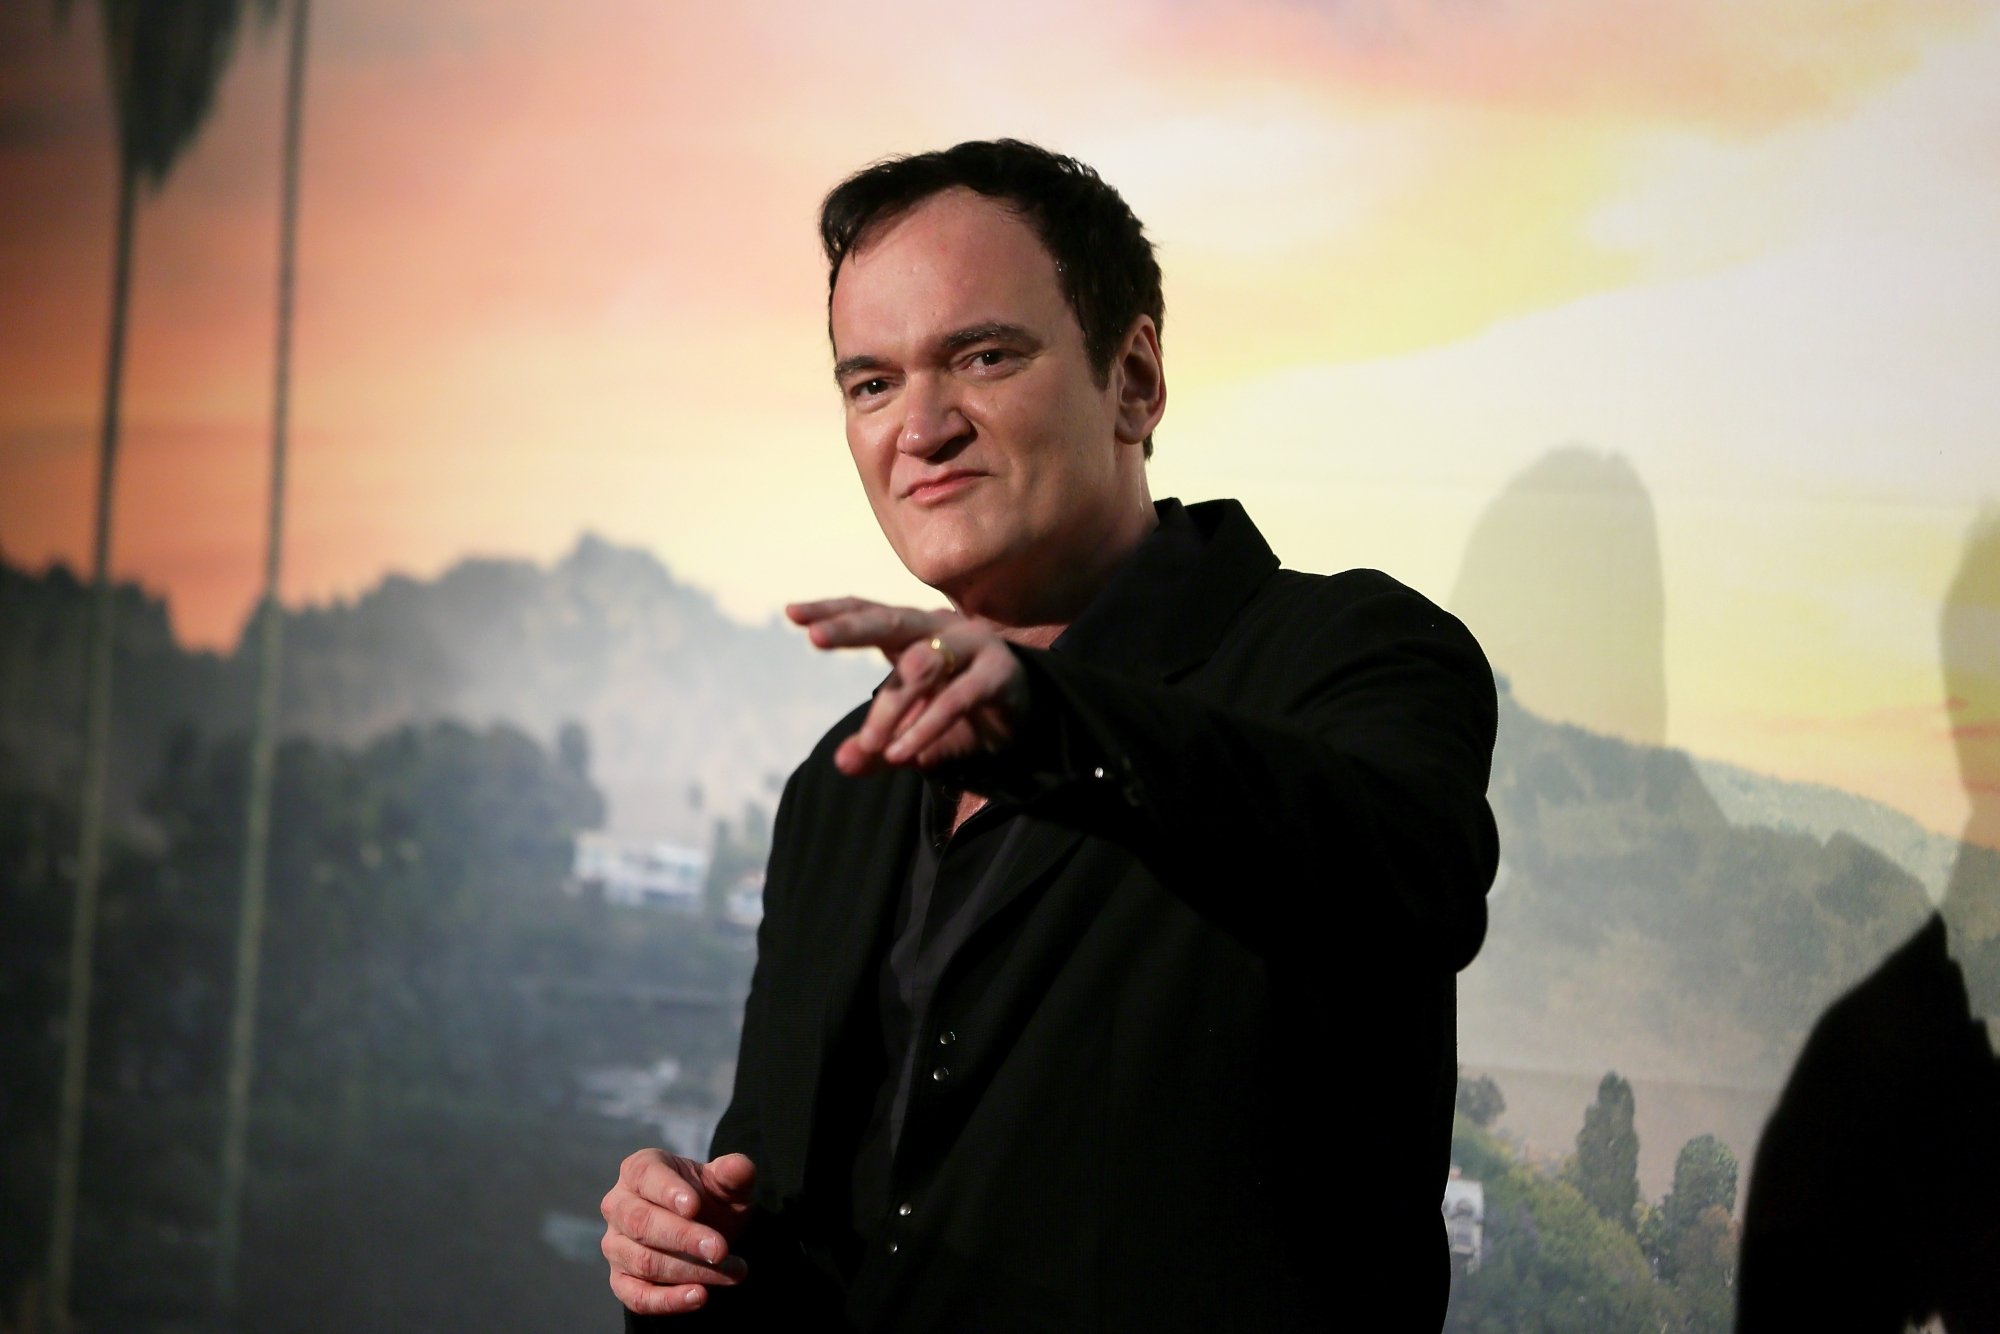 Quentin Tarantino in 'Once Upon a Time in Hollywood' premiere, which tipped its hat to 'Gunsmoke.' He's holding his hand out in front of a picture of the Hollywood Hills.